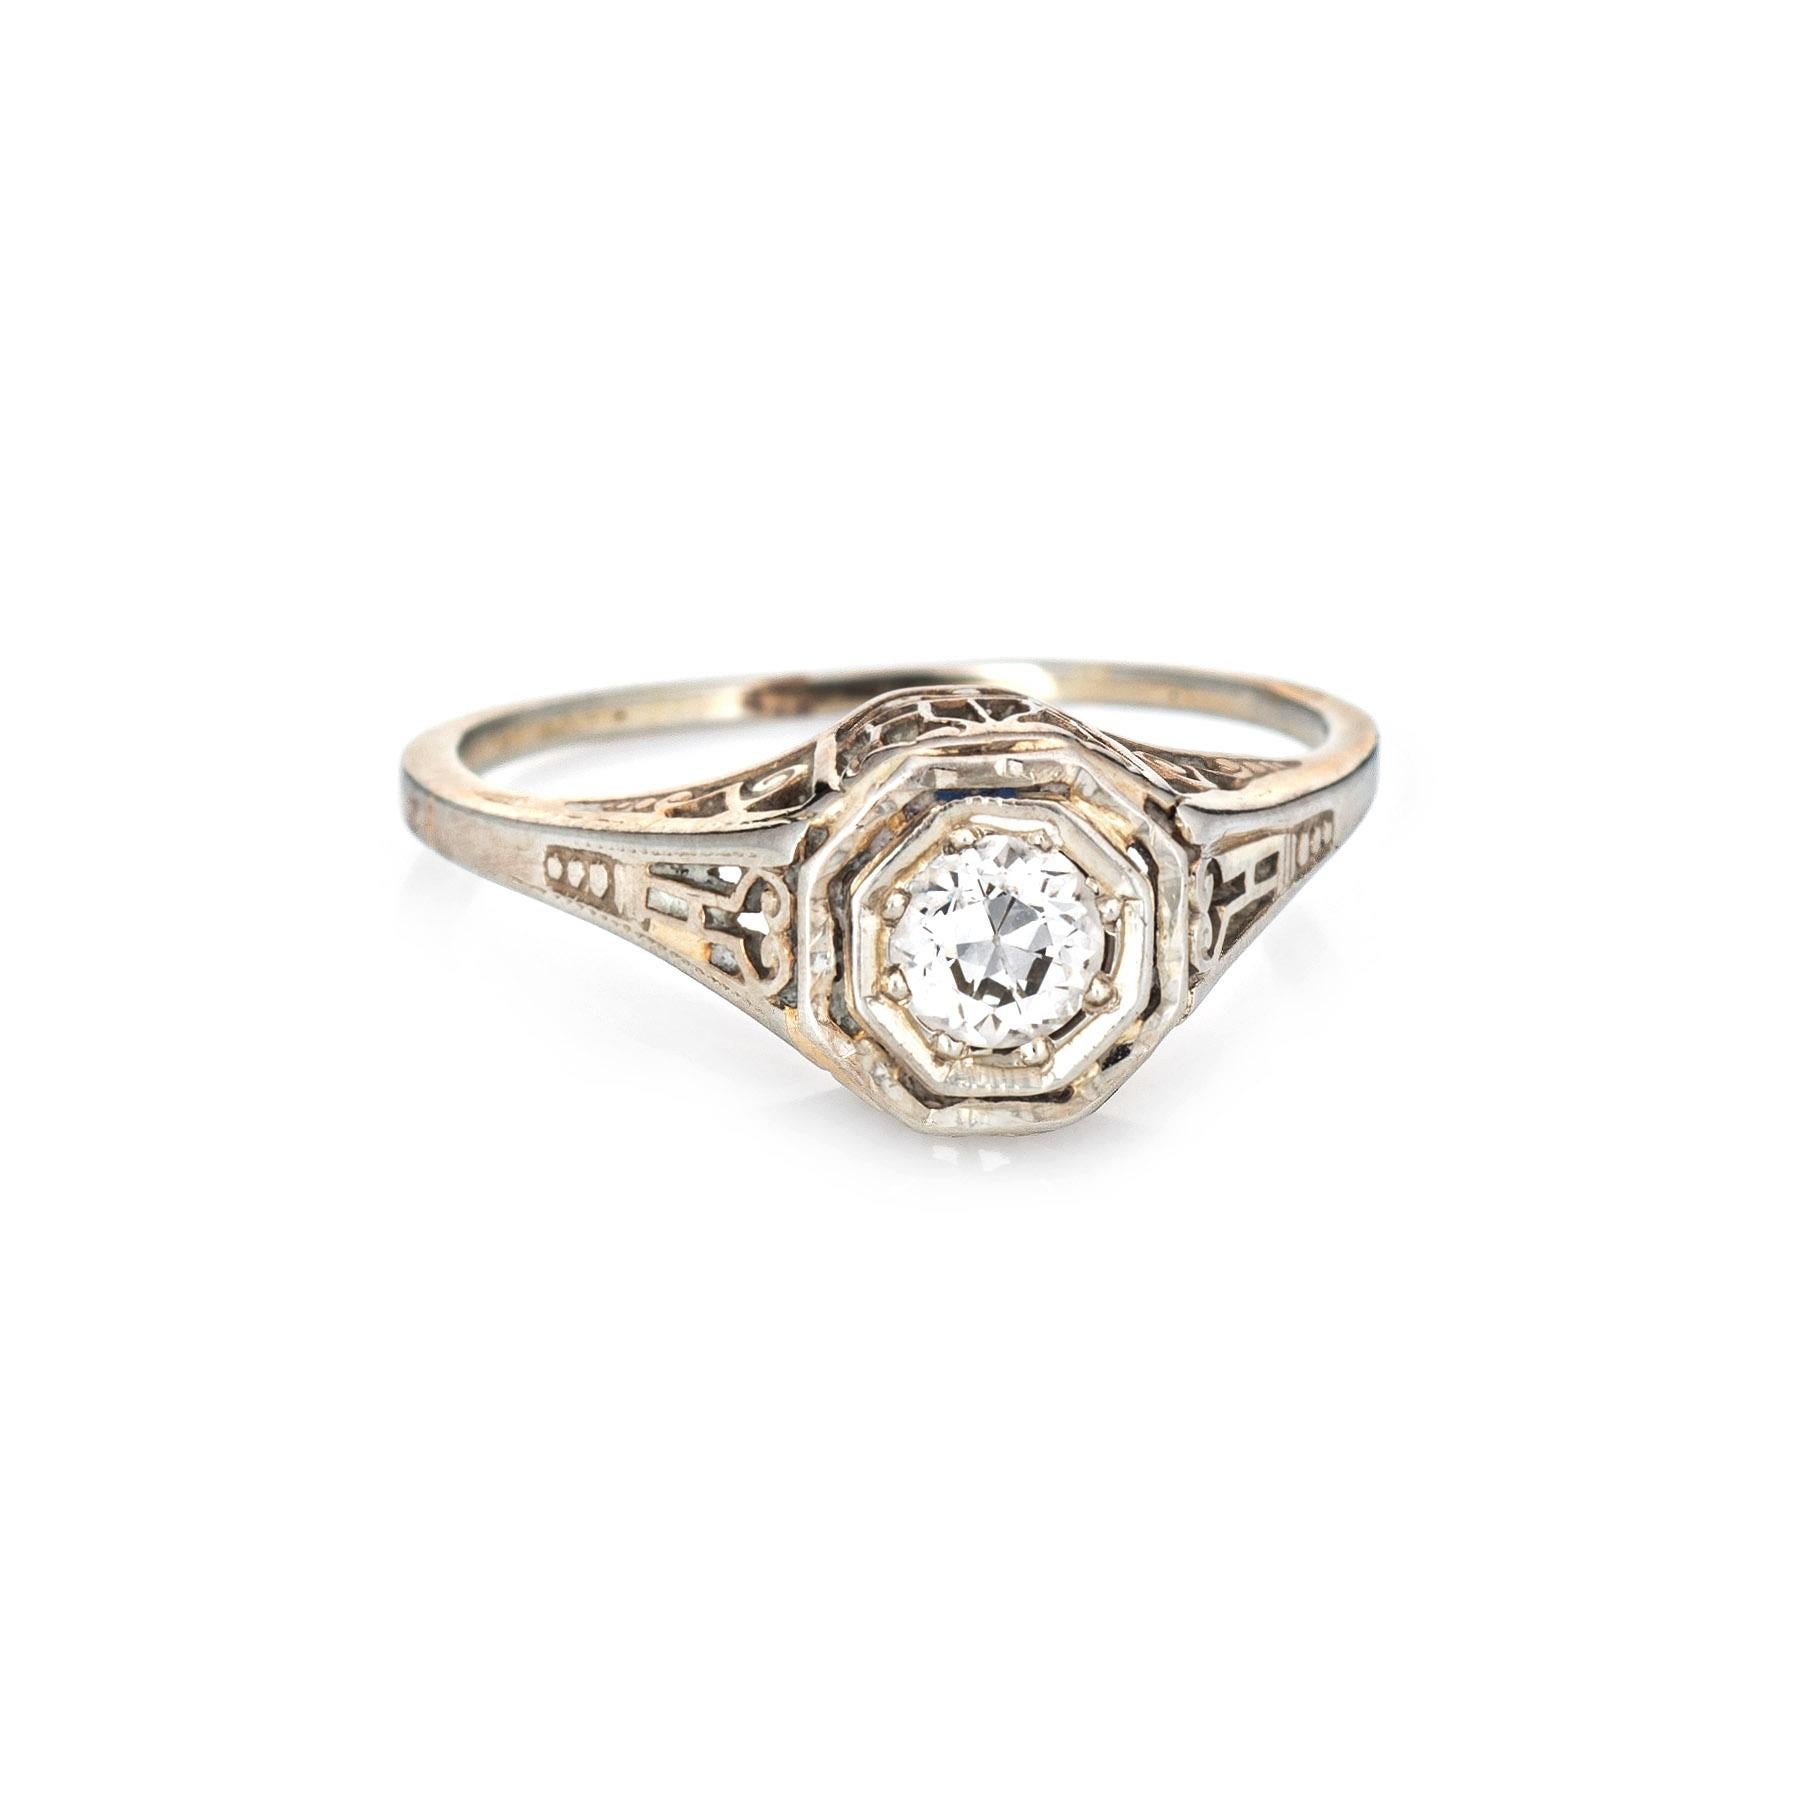 Finely detailed vintage Art Deco diamond engagement ring (circa 1920s to 1930s) crafted in 18 karat white gold. 

One old European cut diamond is estimated at 0.20 carats (estimated at H-I color and VS2 clarity). 

The old European cut diamond is